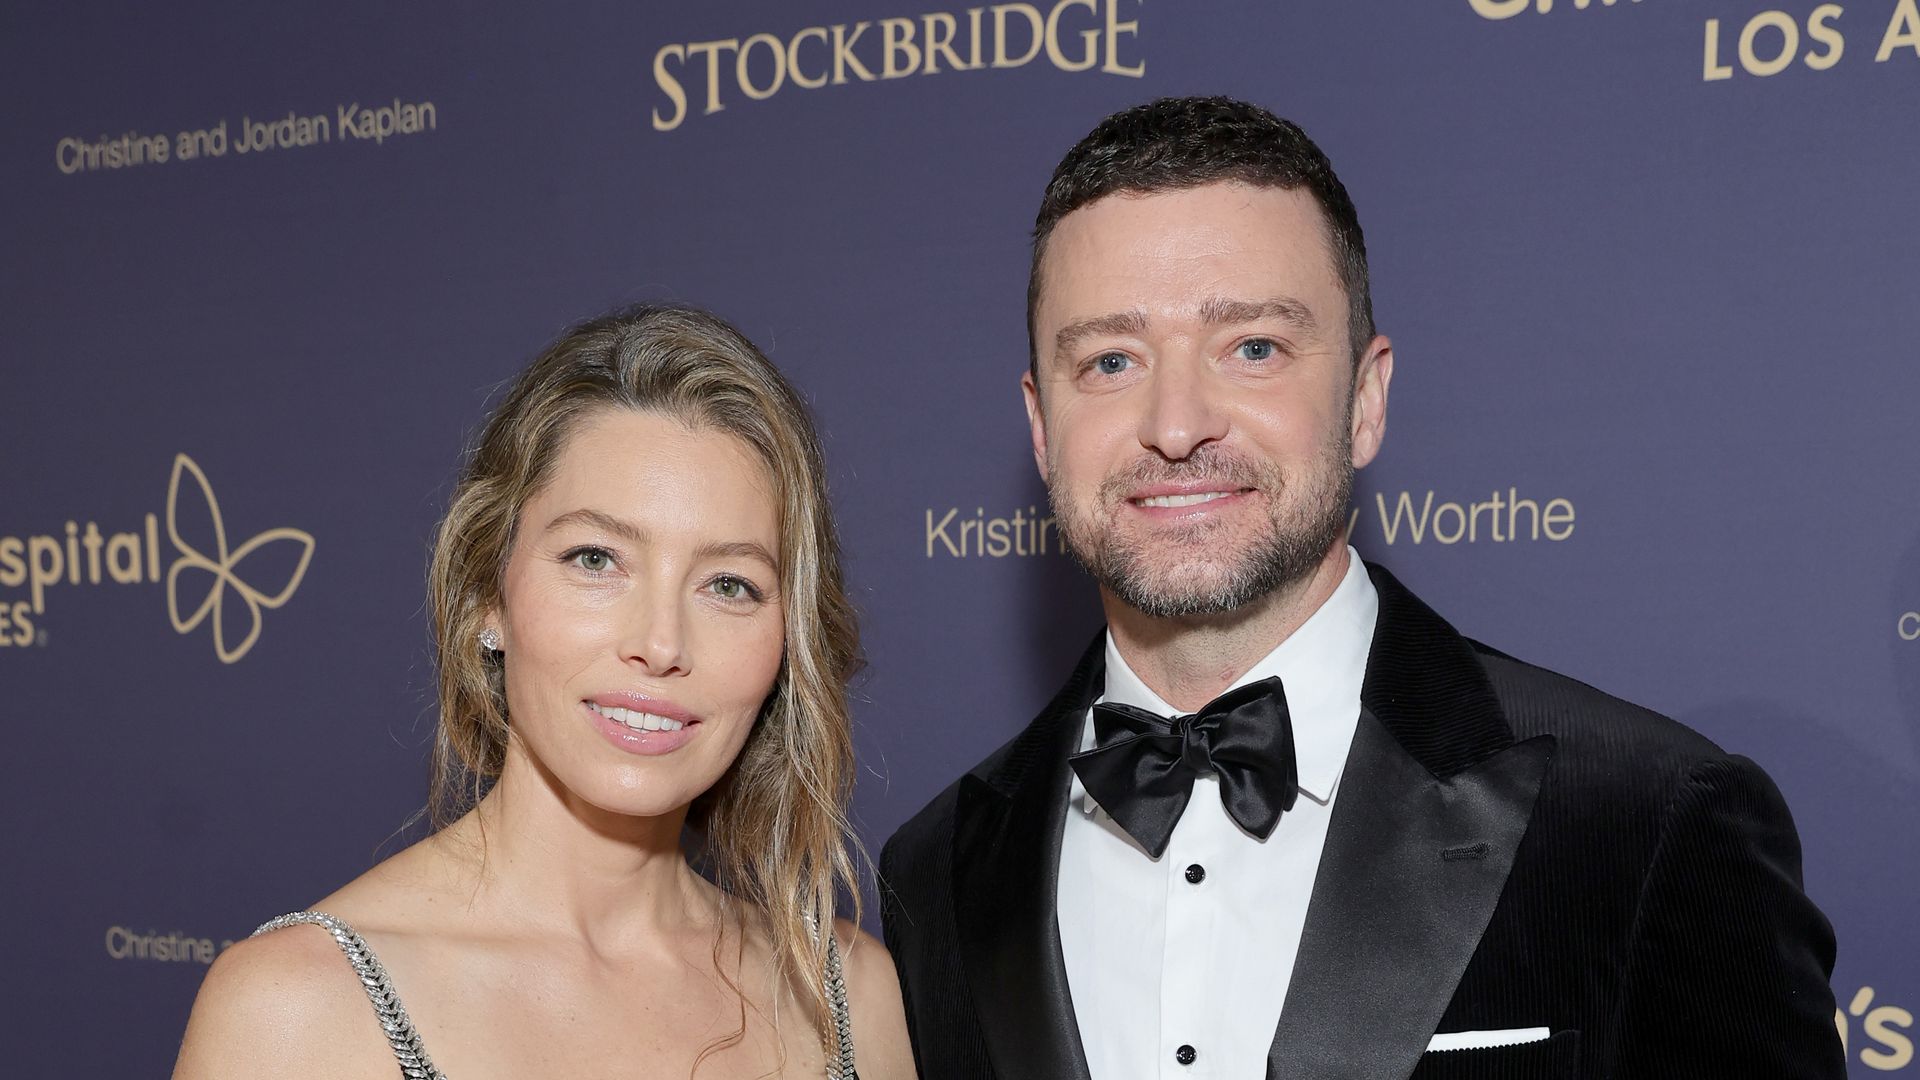 Jessica Biel and Justin Timberlake attend the 2022 Children's Hospital Los Angeles Gala at the Barker Hangar on October 08, 2022 in Santa Monica, California.